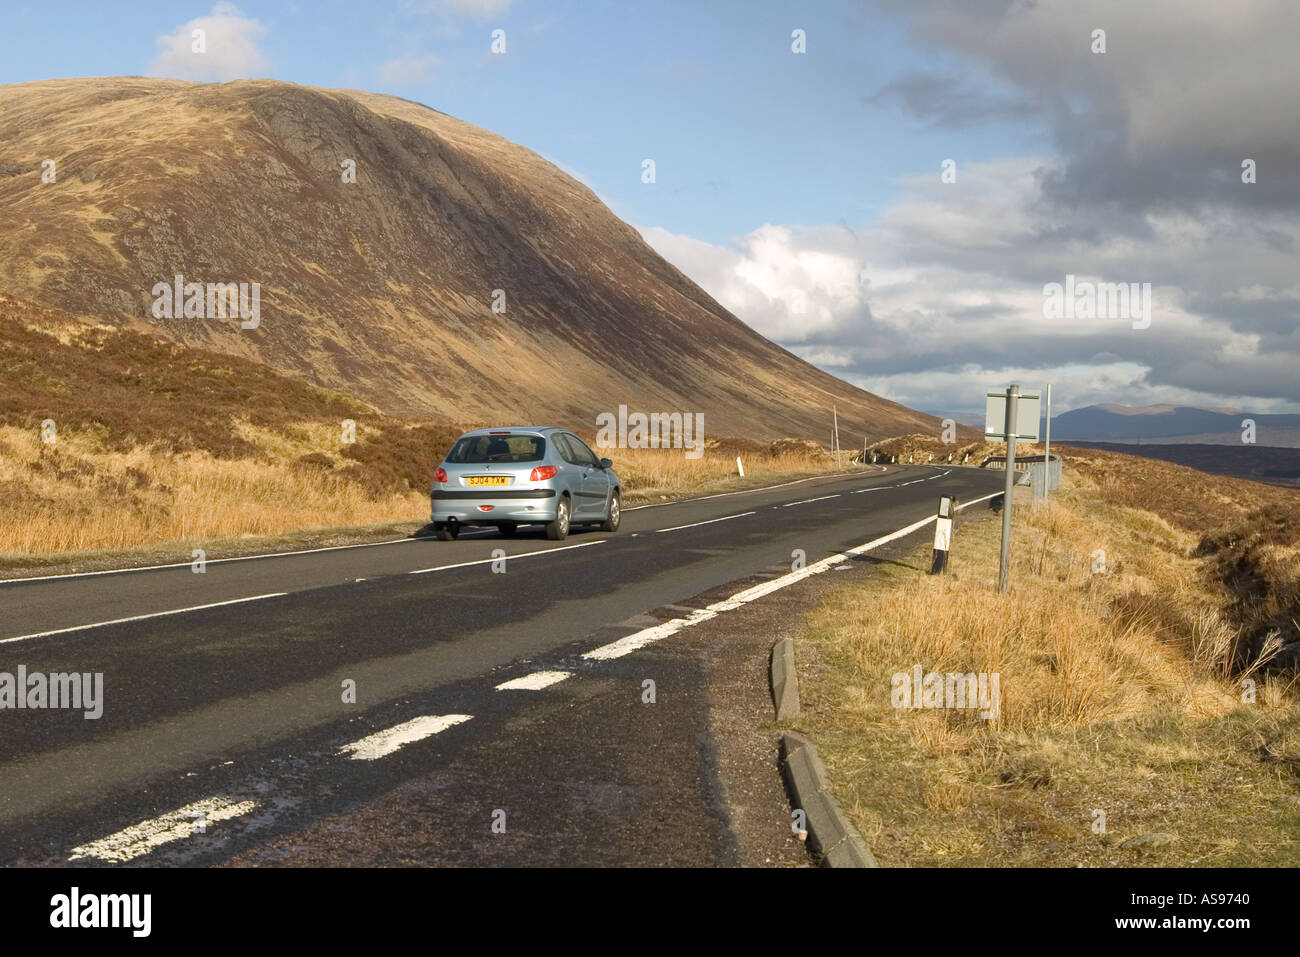 dh  GLENCOE ARGYLL Peugot silver car travelling down road mountains glen coe scotland highlands highland countryside drive scottish travel scenic a82 Stock Photo